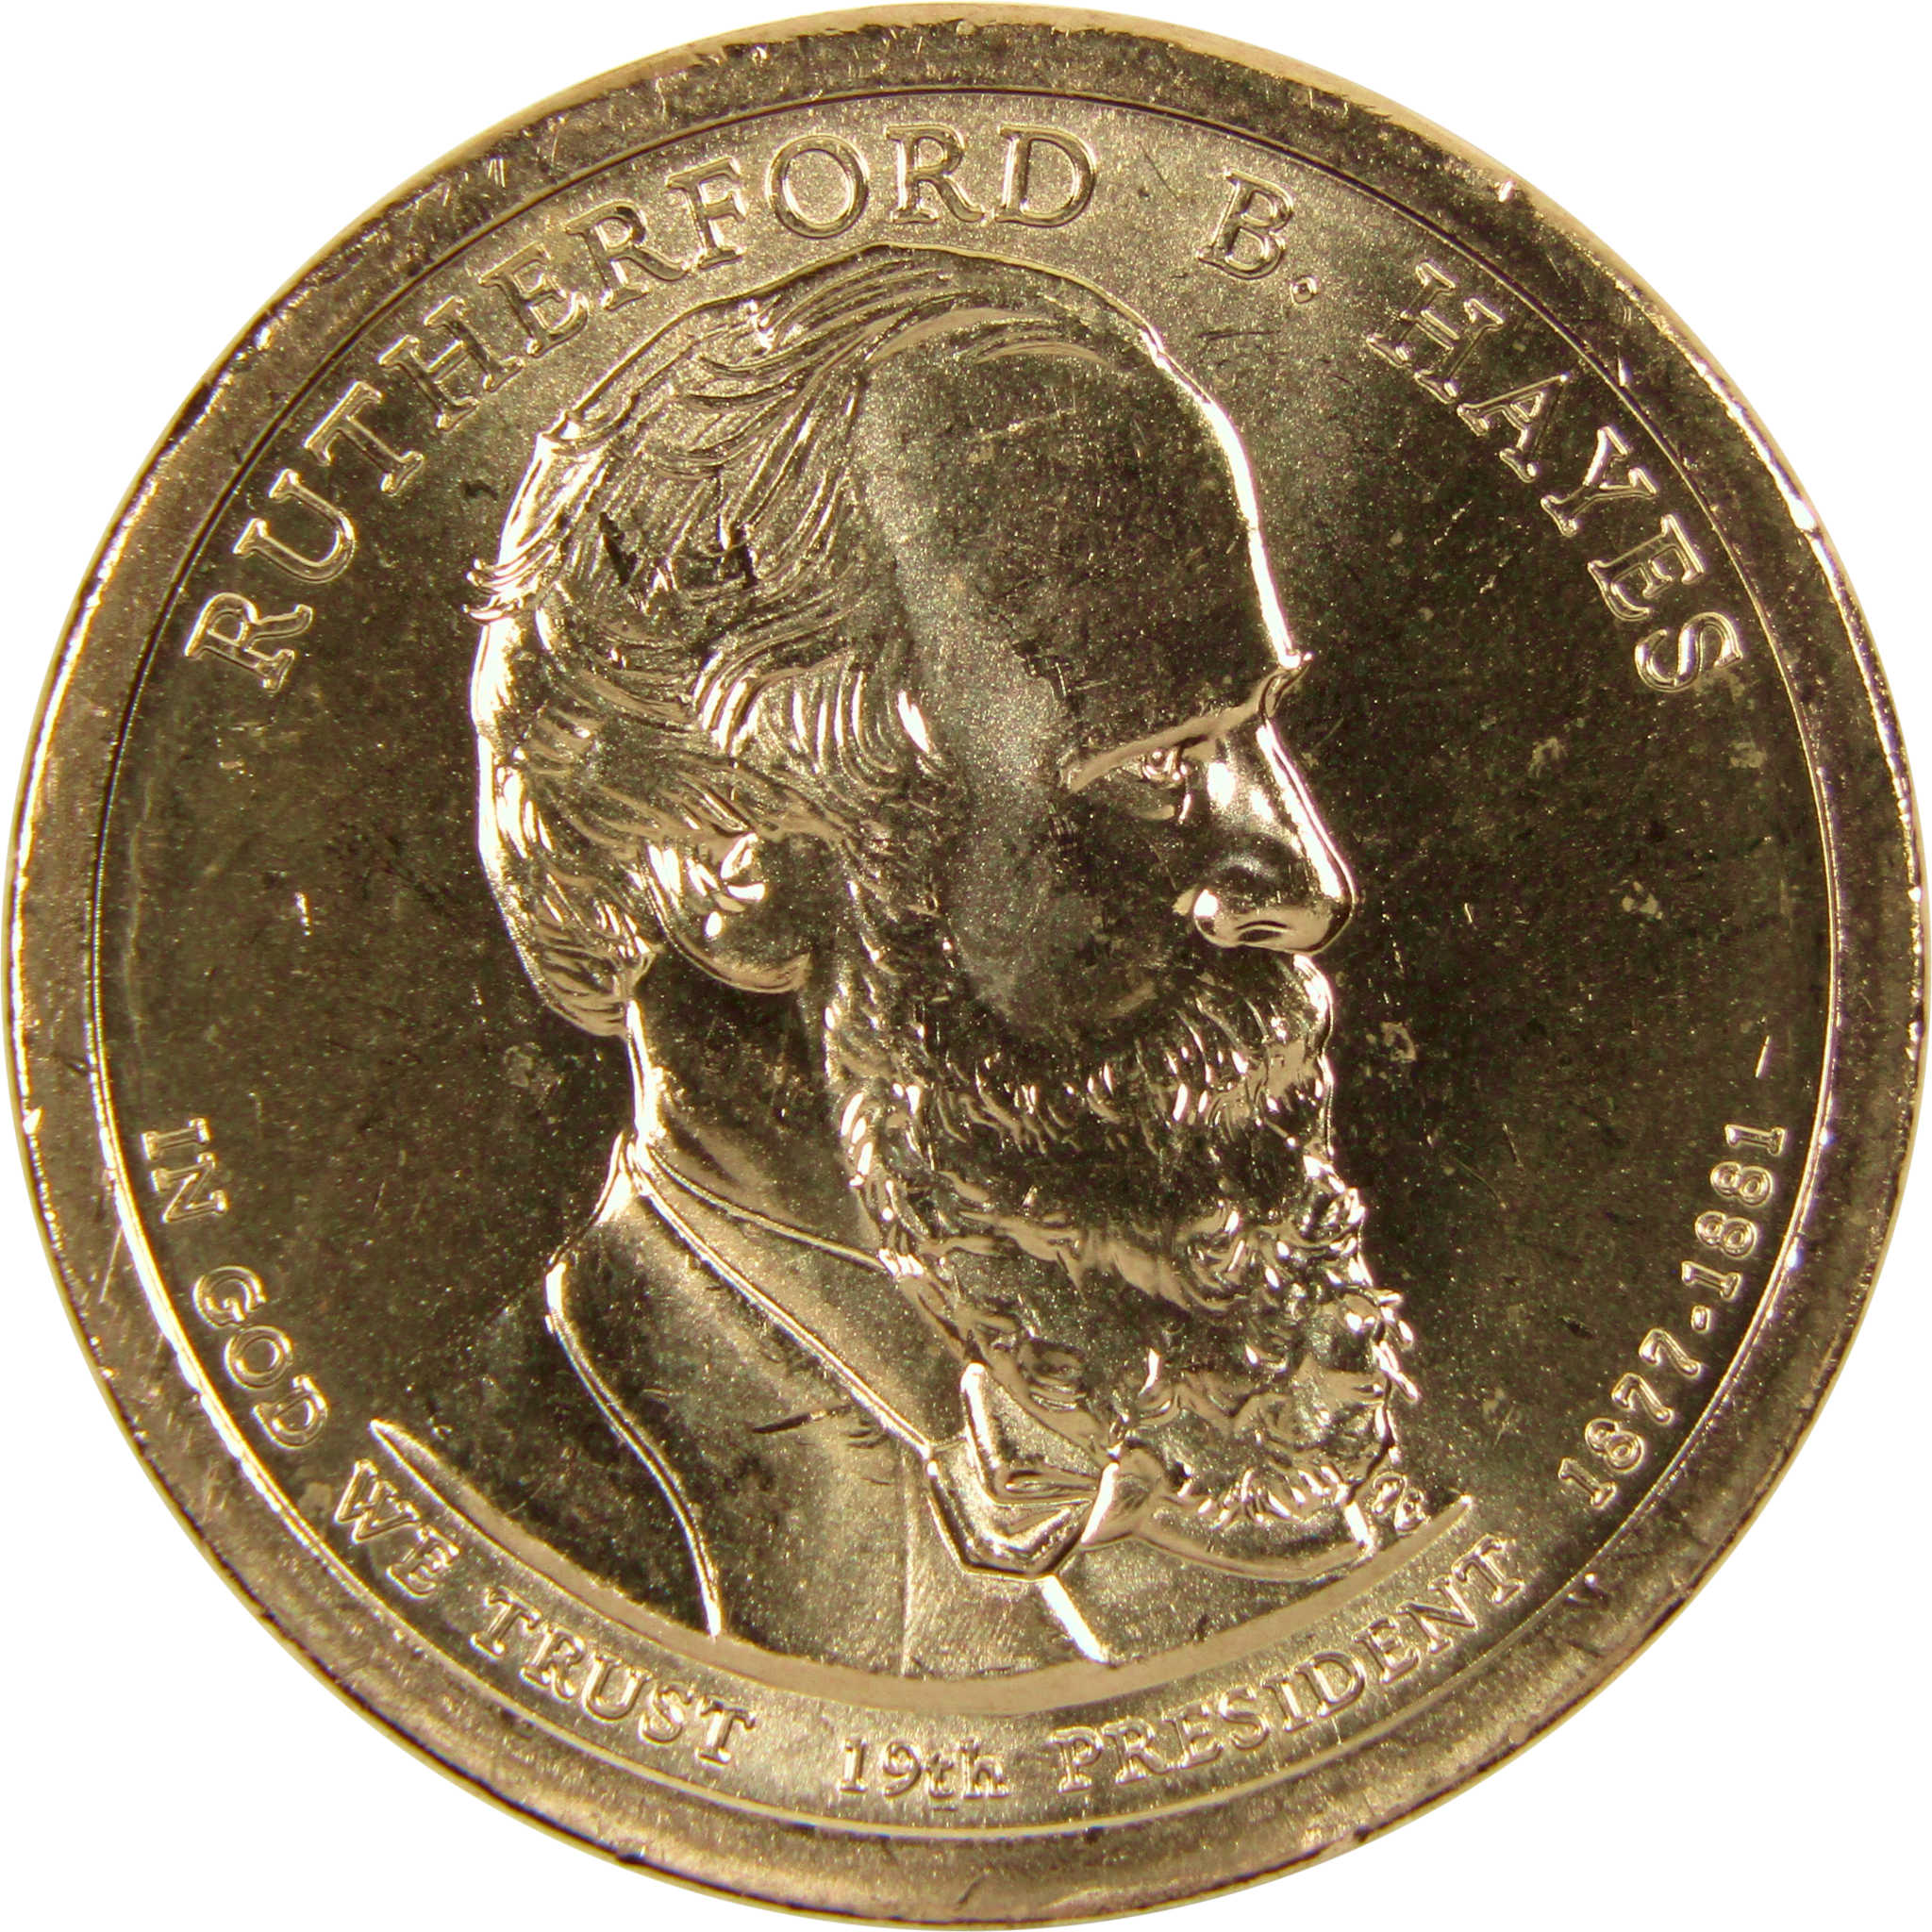 2011 P Rutherford B. Hayes Presidential Dollar BU Uncirculated $1 Coin